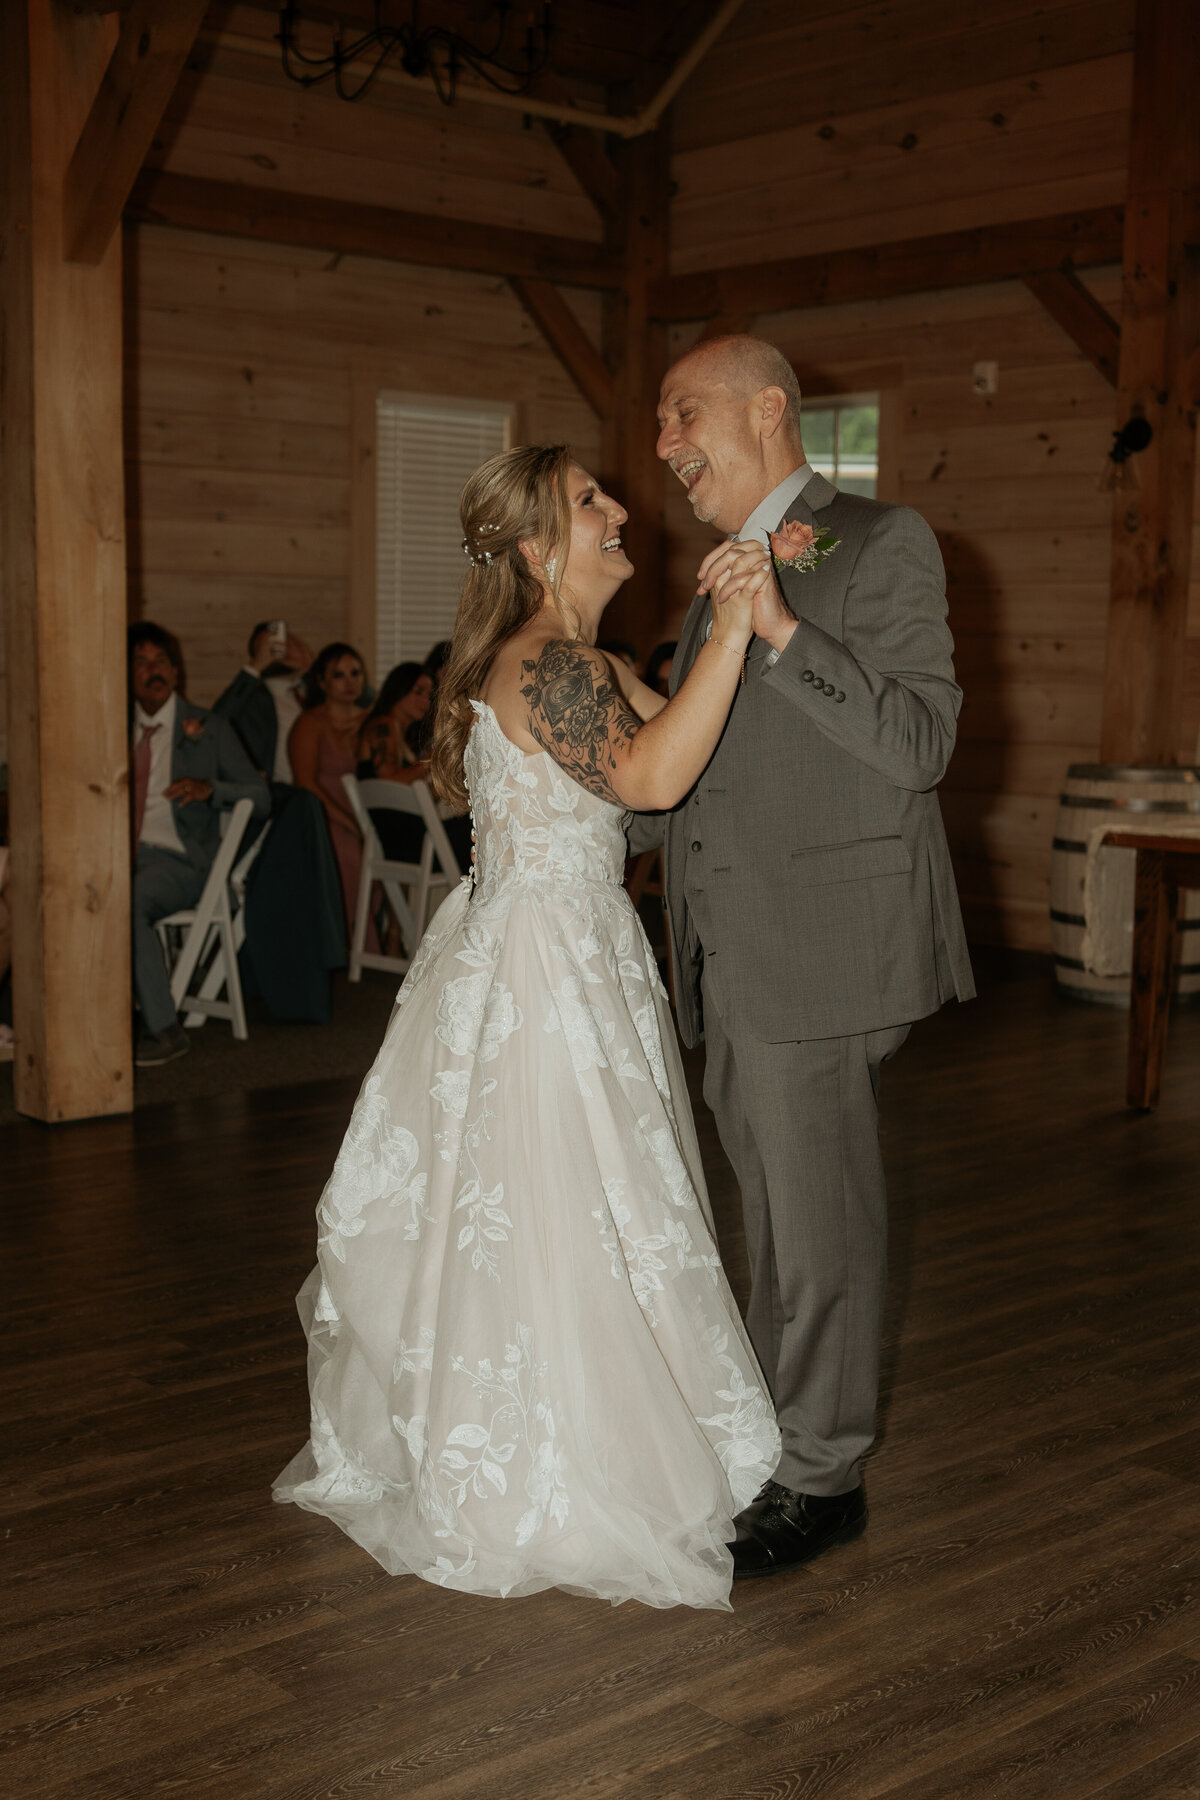 Bride and her father share a joyful dance at a rustic indoor wedding venue. The bride, in a lace gown with floral details and a visible arm tattoo, and her father, in a grey suit, smile and laugh together. The warm wooden interior and the presence of guests in the background add to the intimate and celebratory atmosphere.